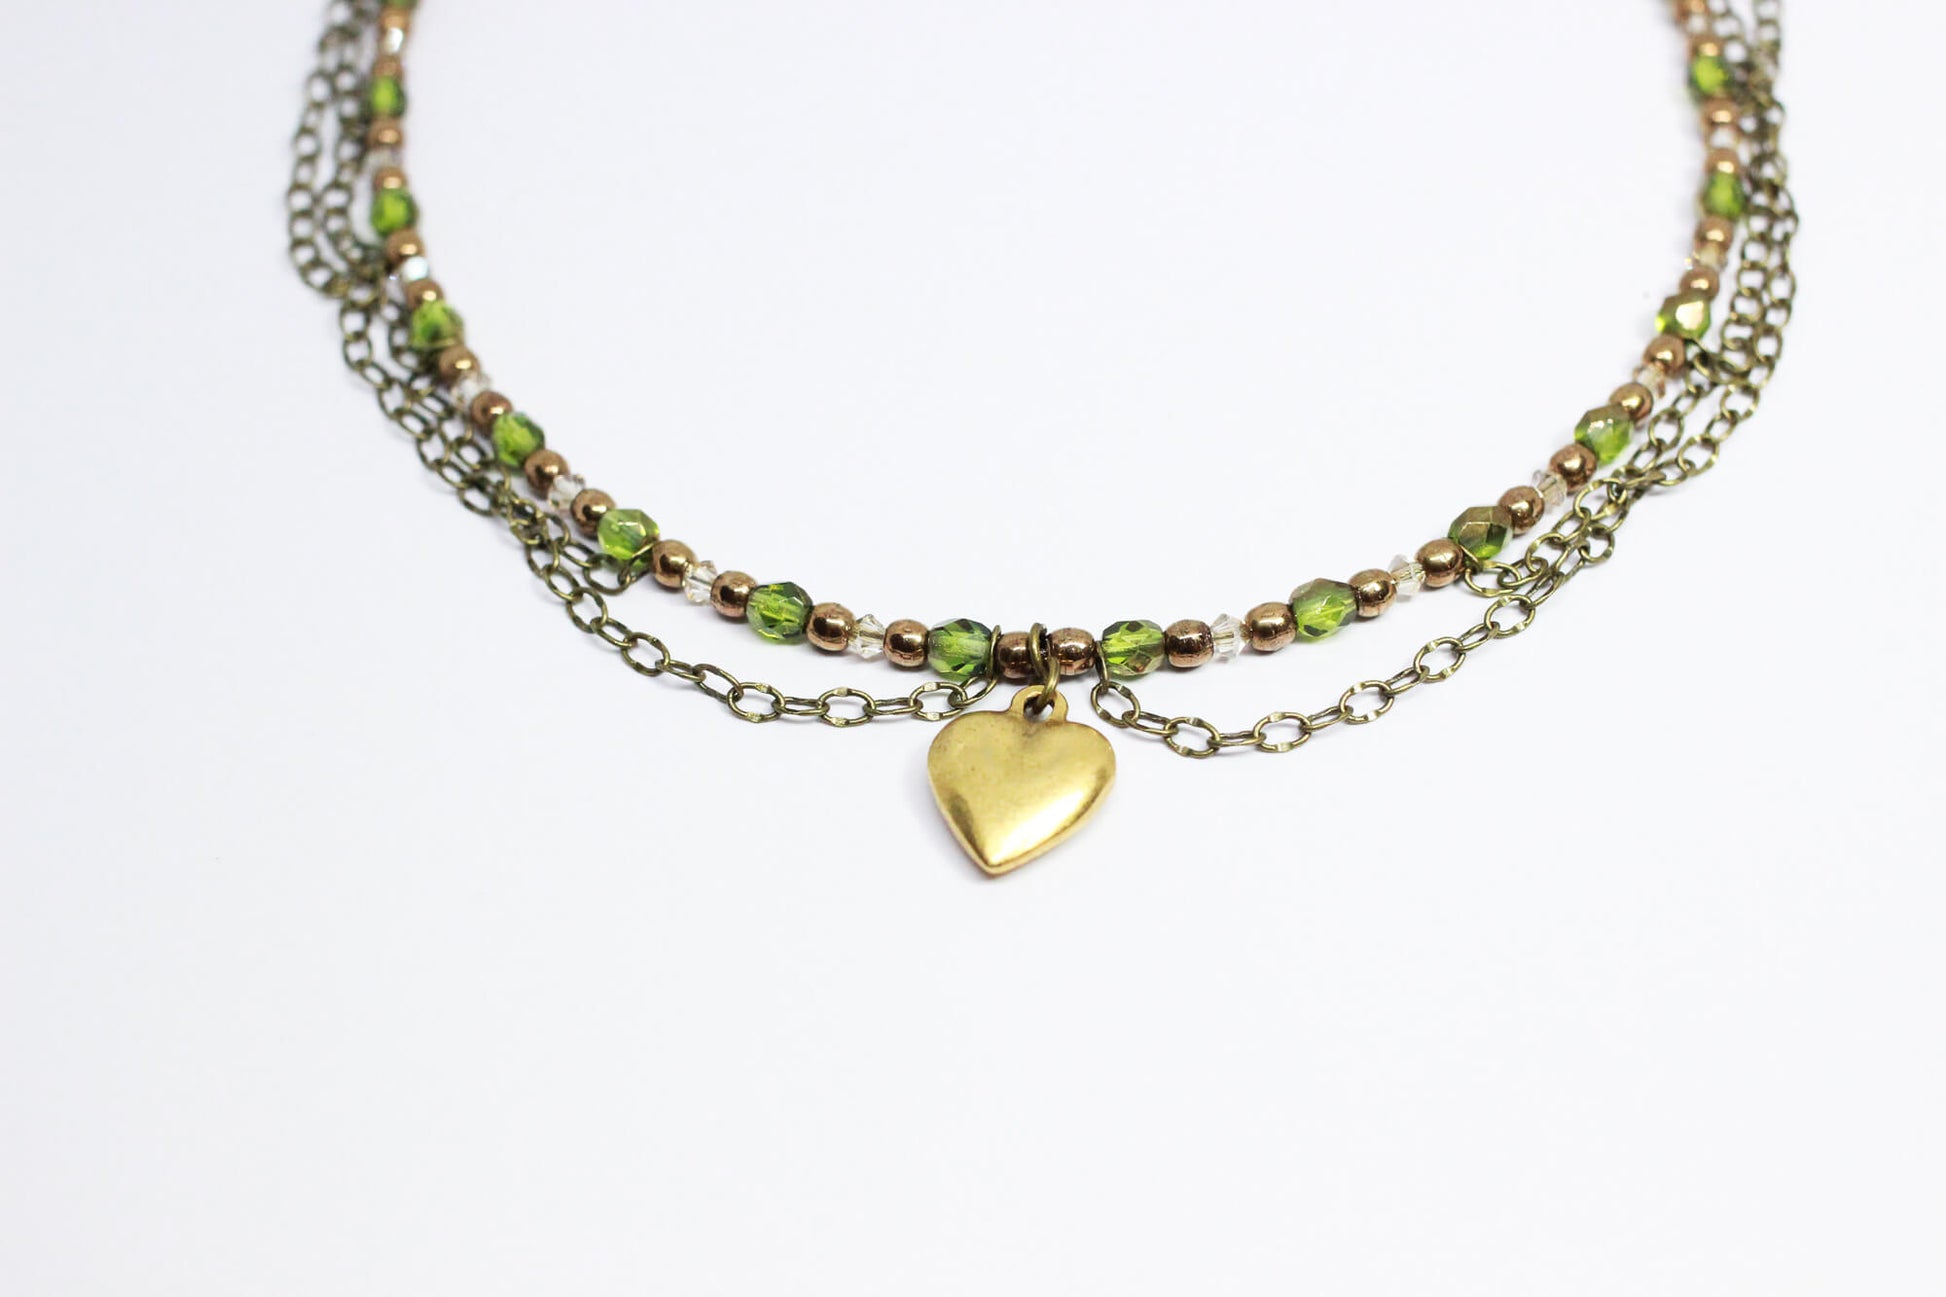 Handmade Green Necklace with Crystals & Heart Pendant